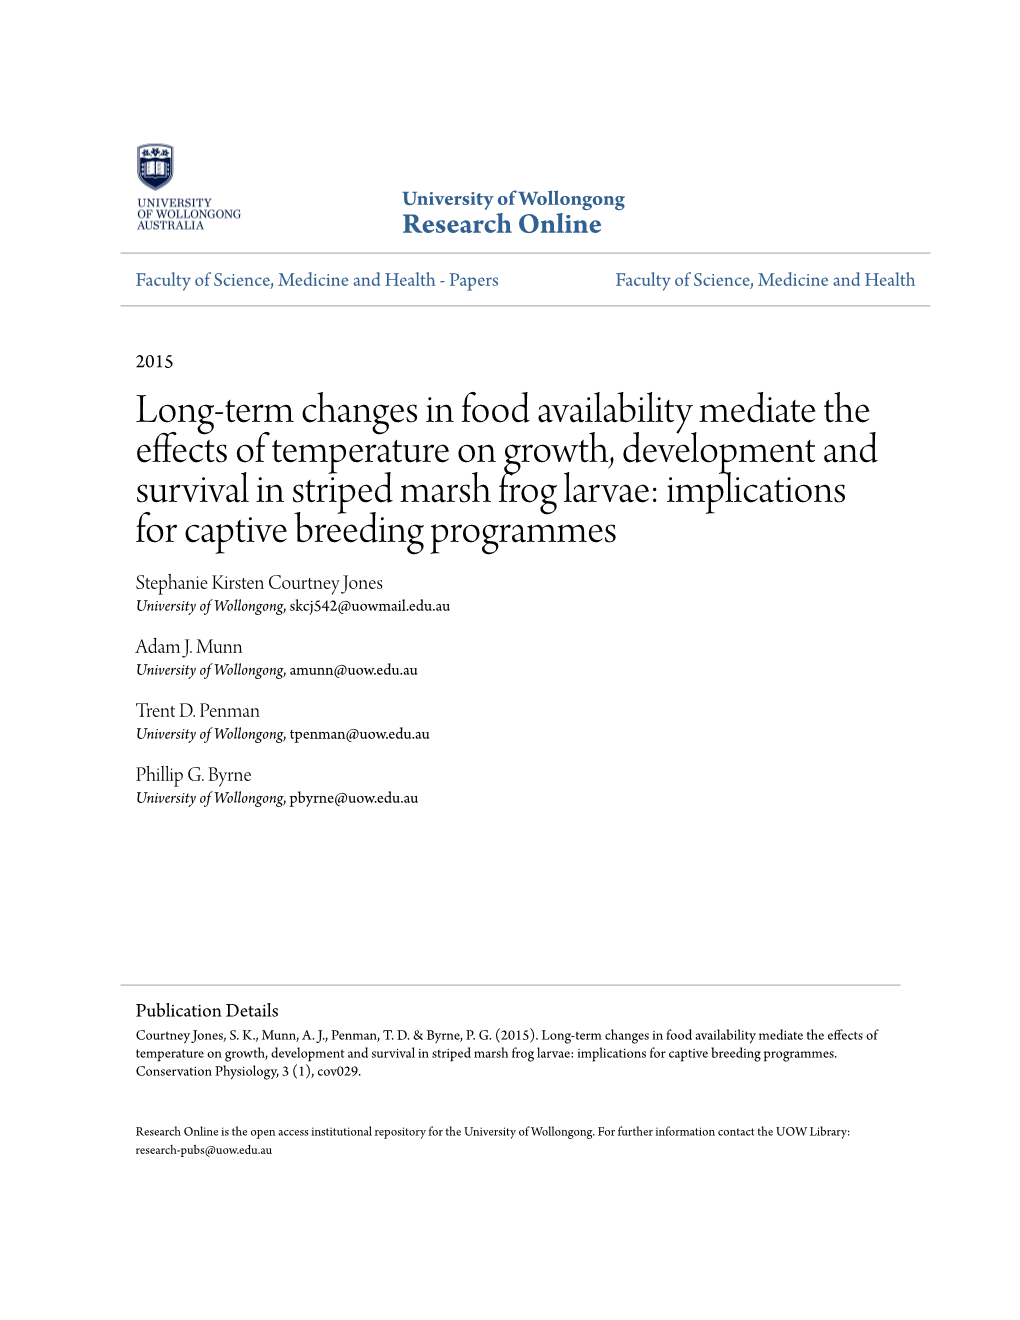 Long-Term Changes in Food Availability Mediate the Effects of Temperature